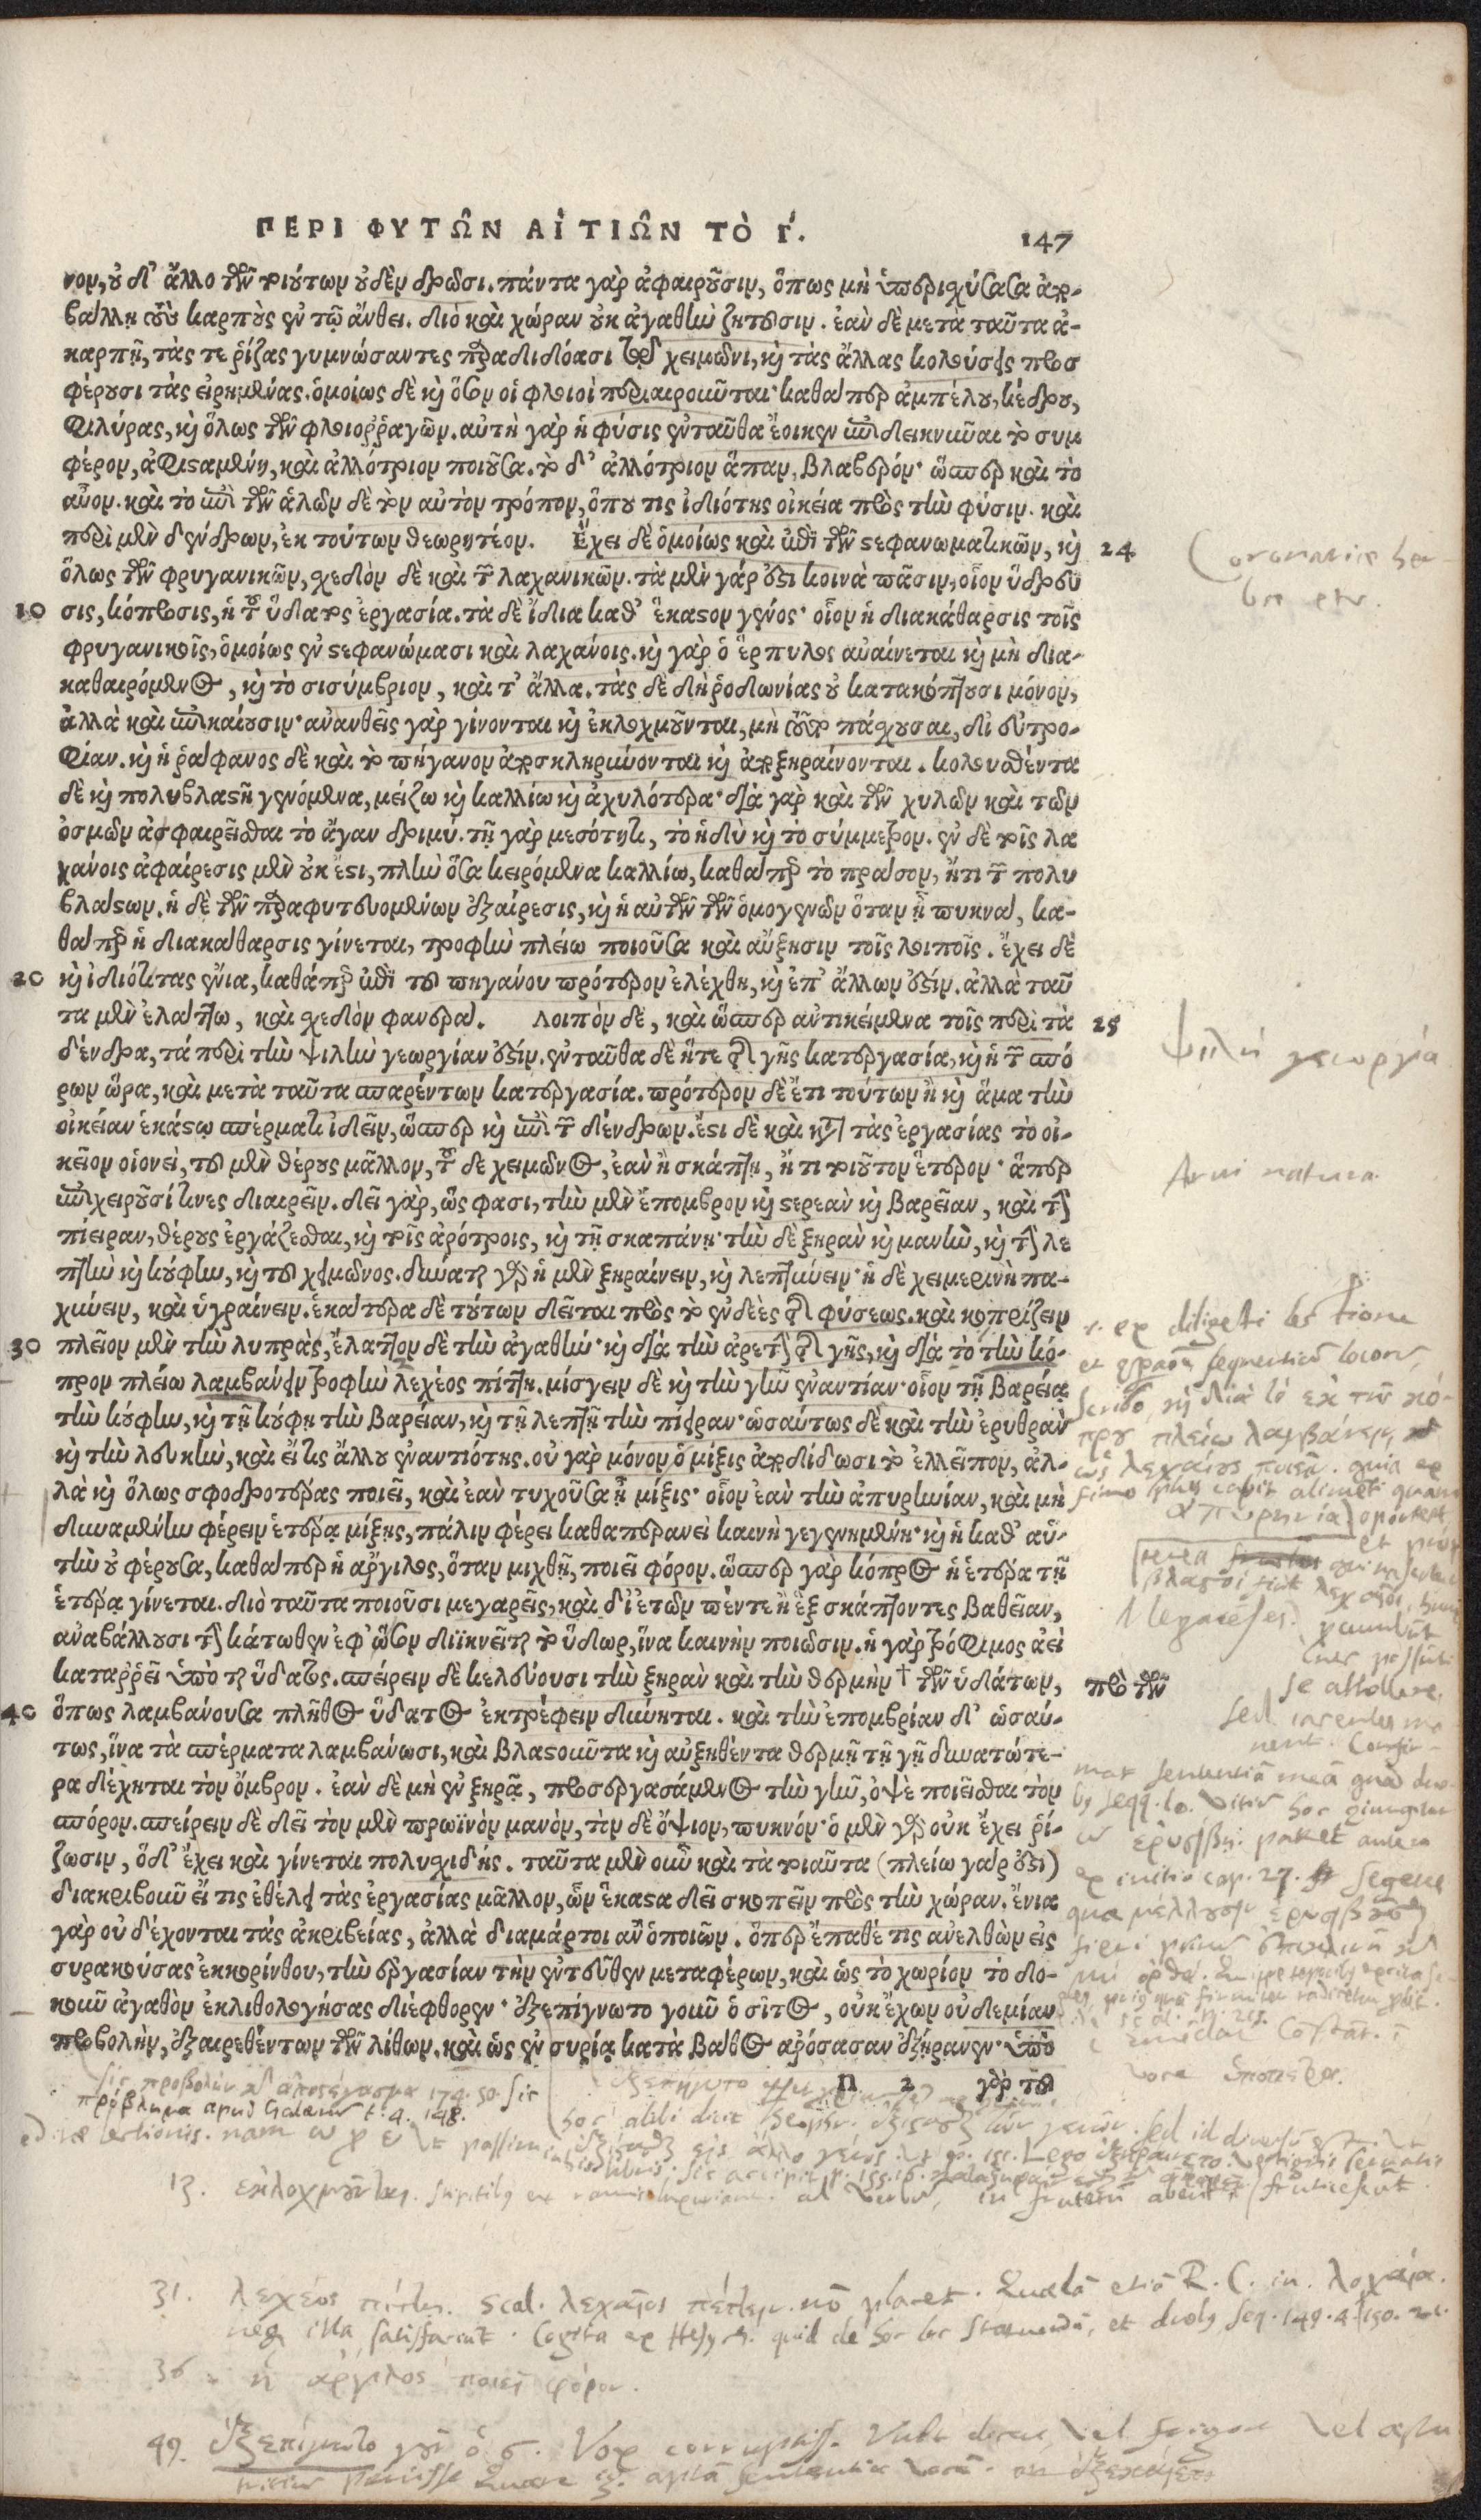 Casaubon's notes. By permission of the Special Collections of the University of Amsterdam. Shelf mark: OTM: Hs VII D17.